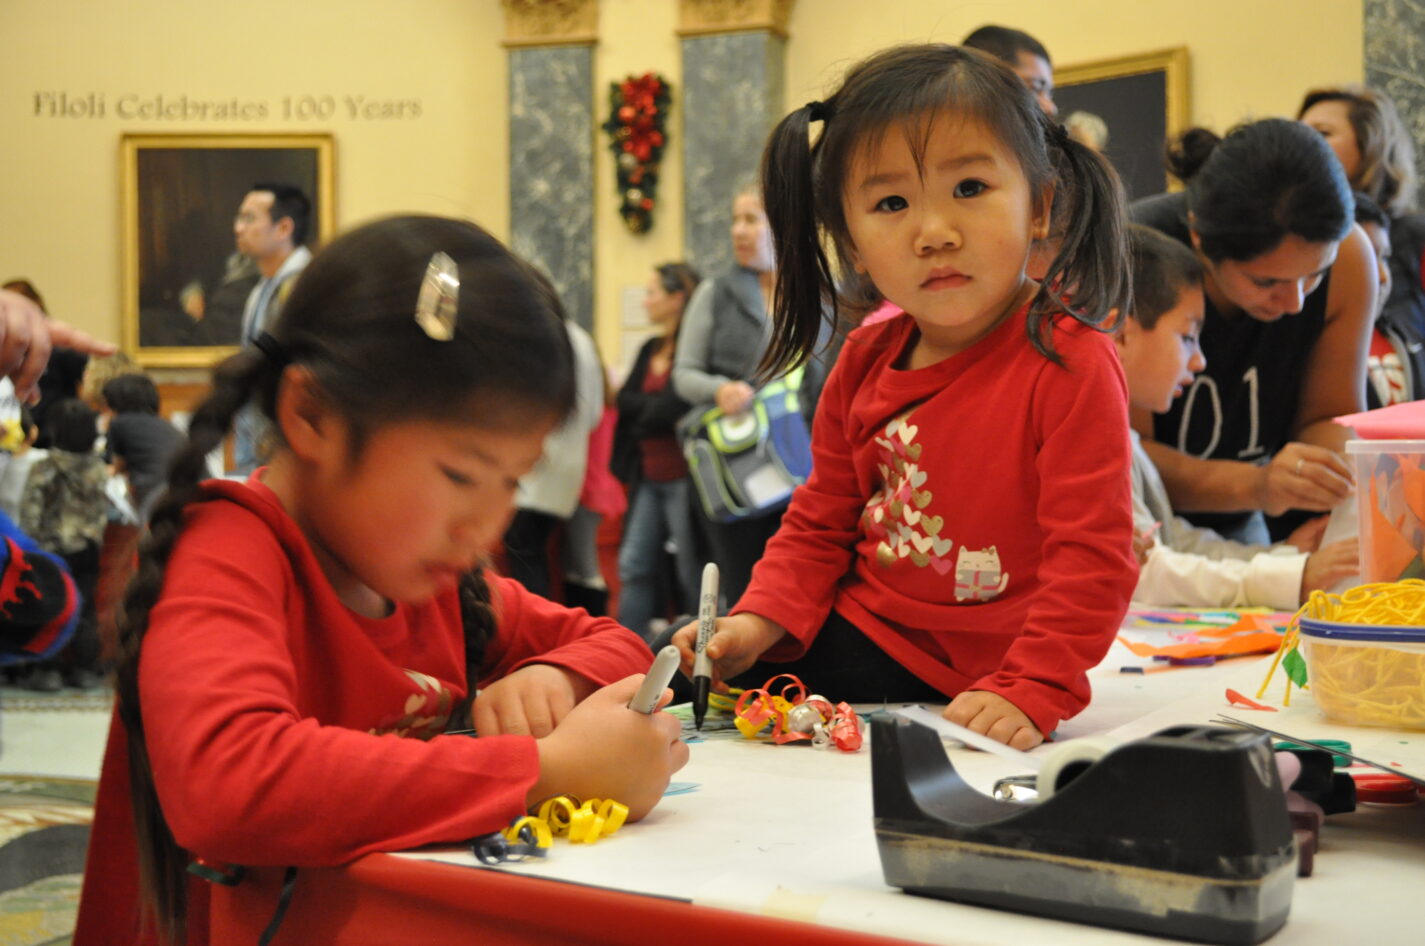 Kids creating a holiday craft at the San Mateo County History Museum